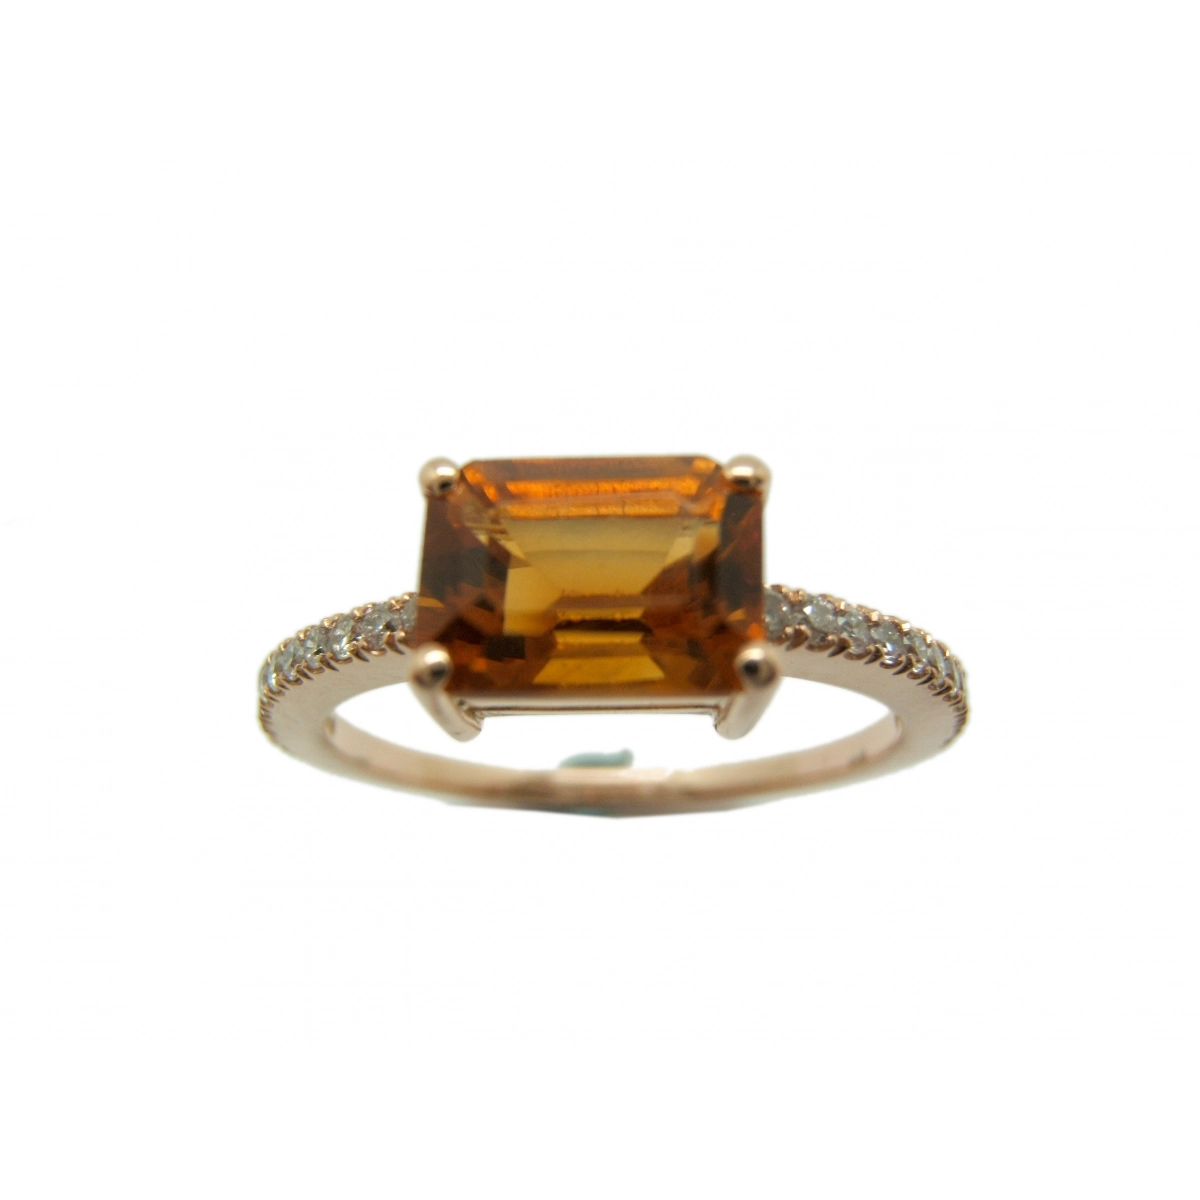 COLLAR RING, ROSE GOLD CITRINE AND DIAMONDS-415 B-79 A-415